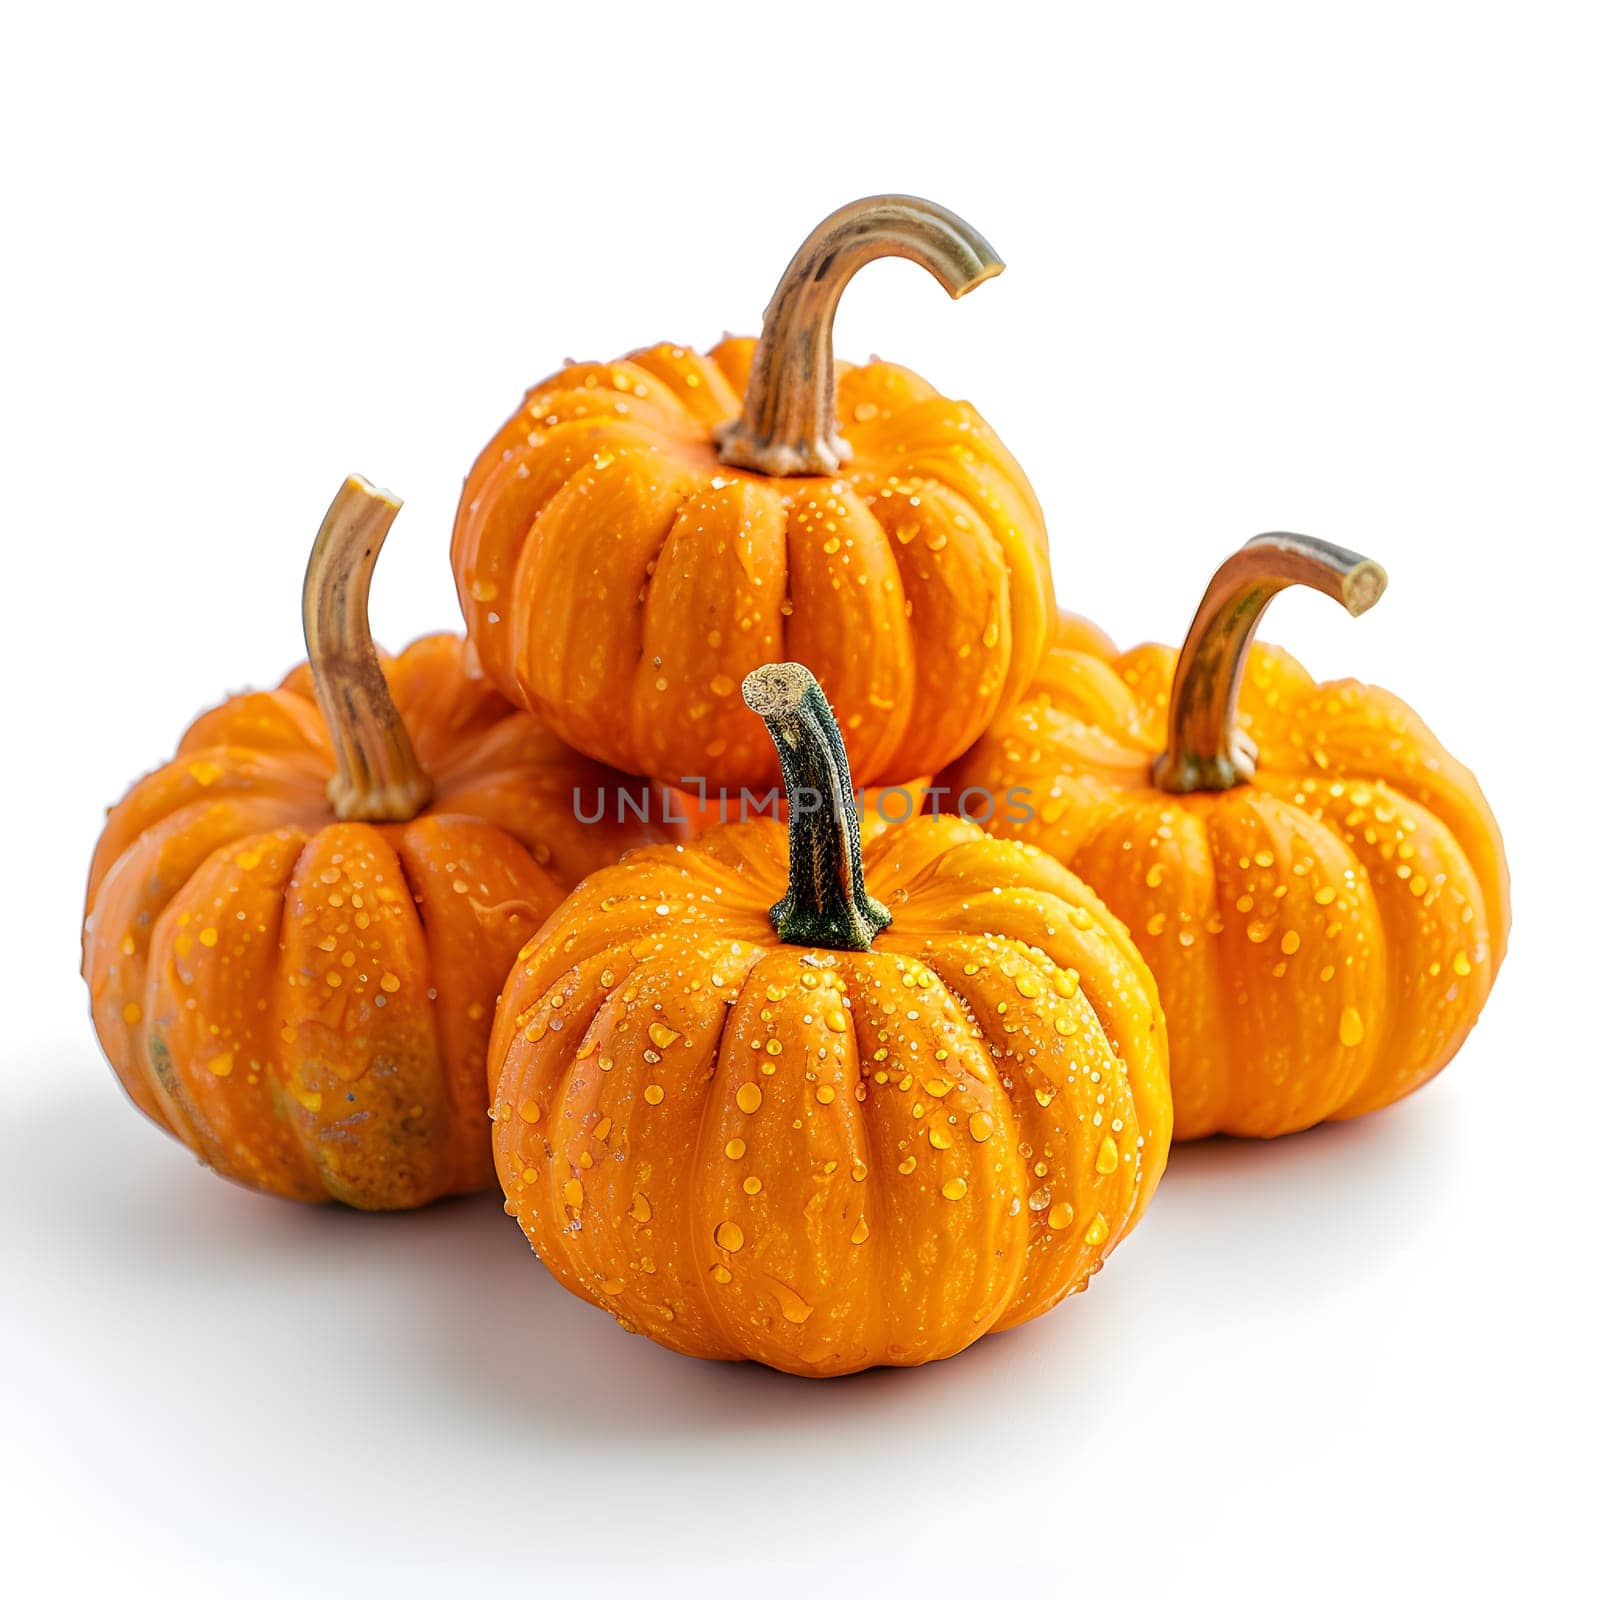 Four small pumpkins stacked on white background, winter squash, orange color by Nadtochiy